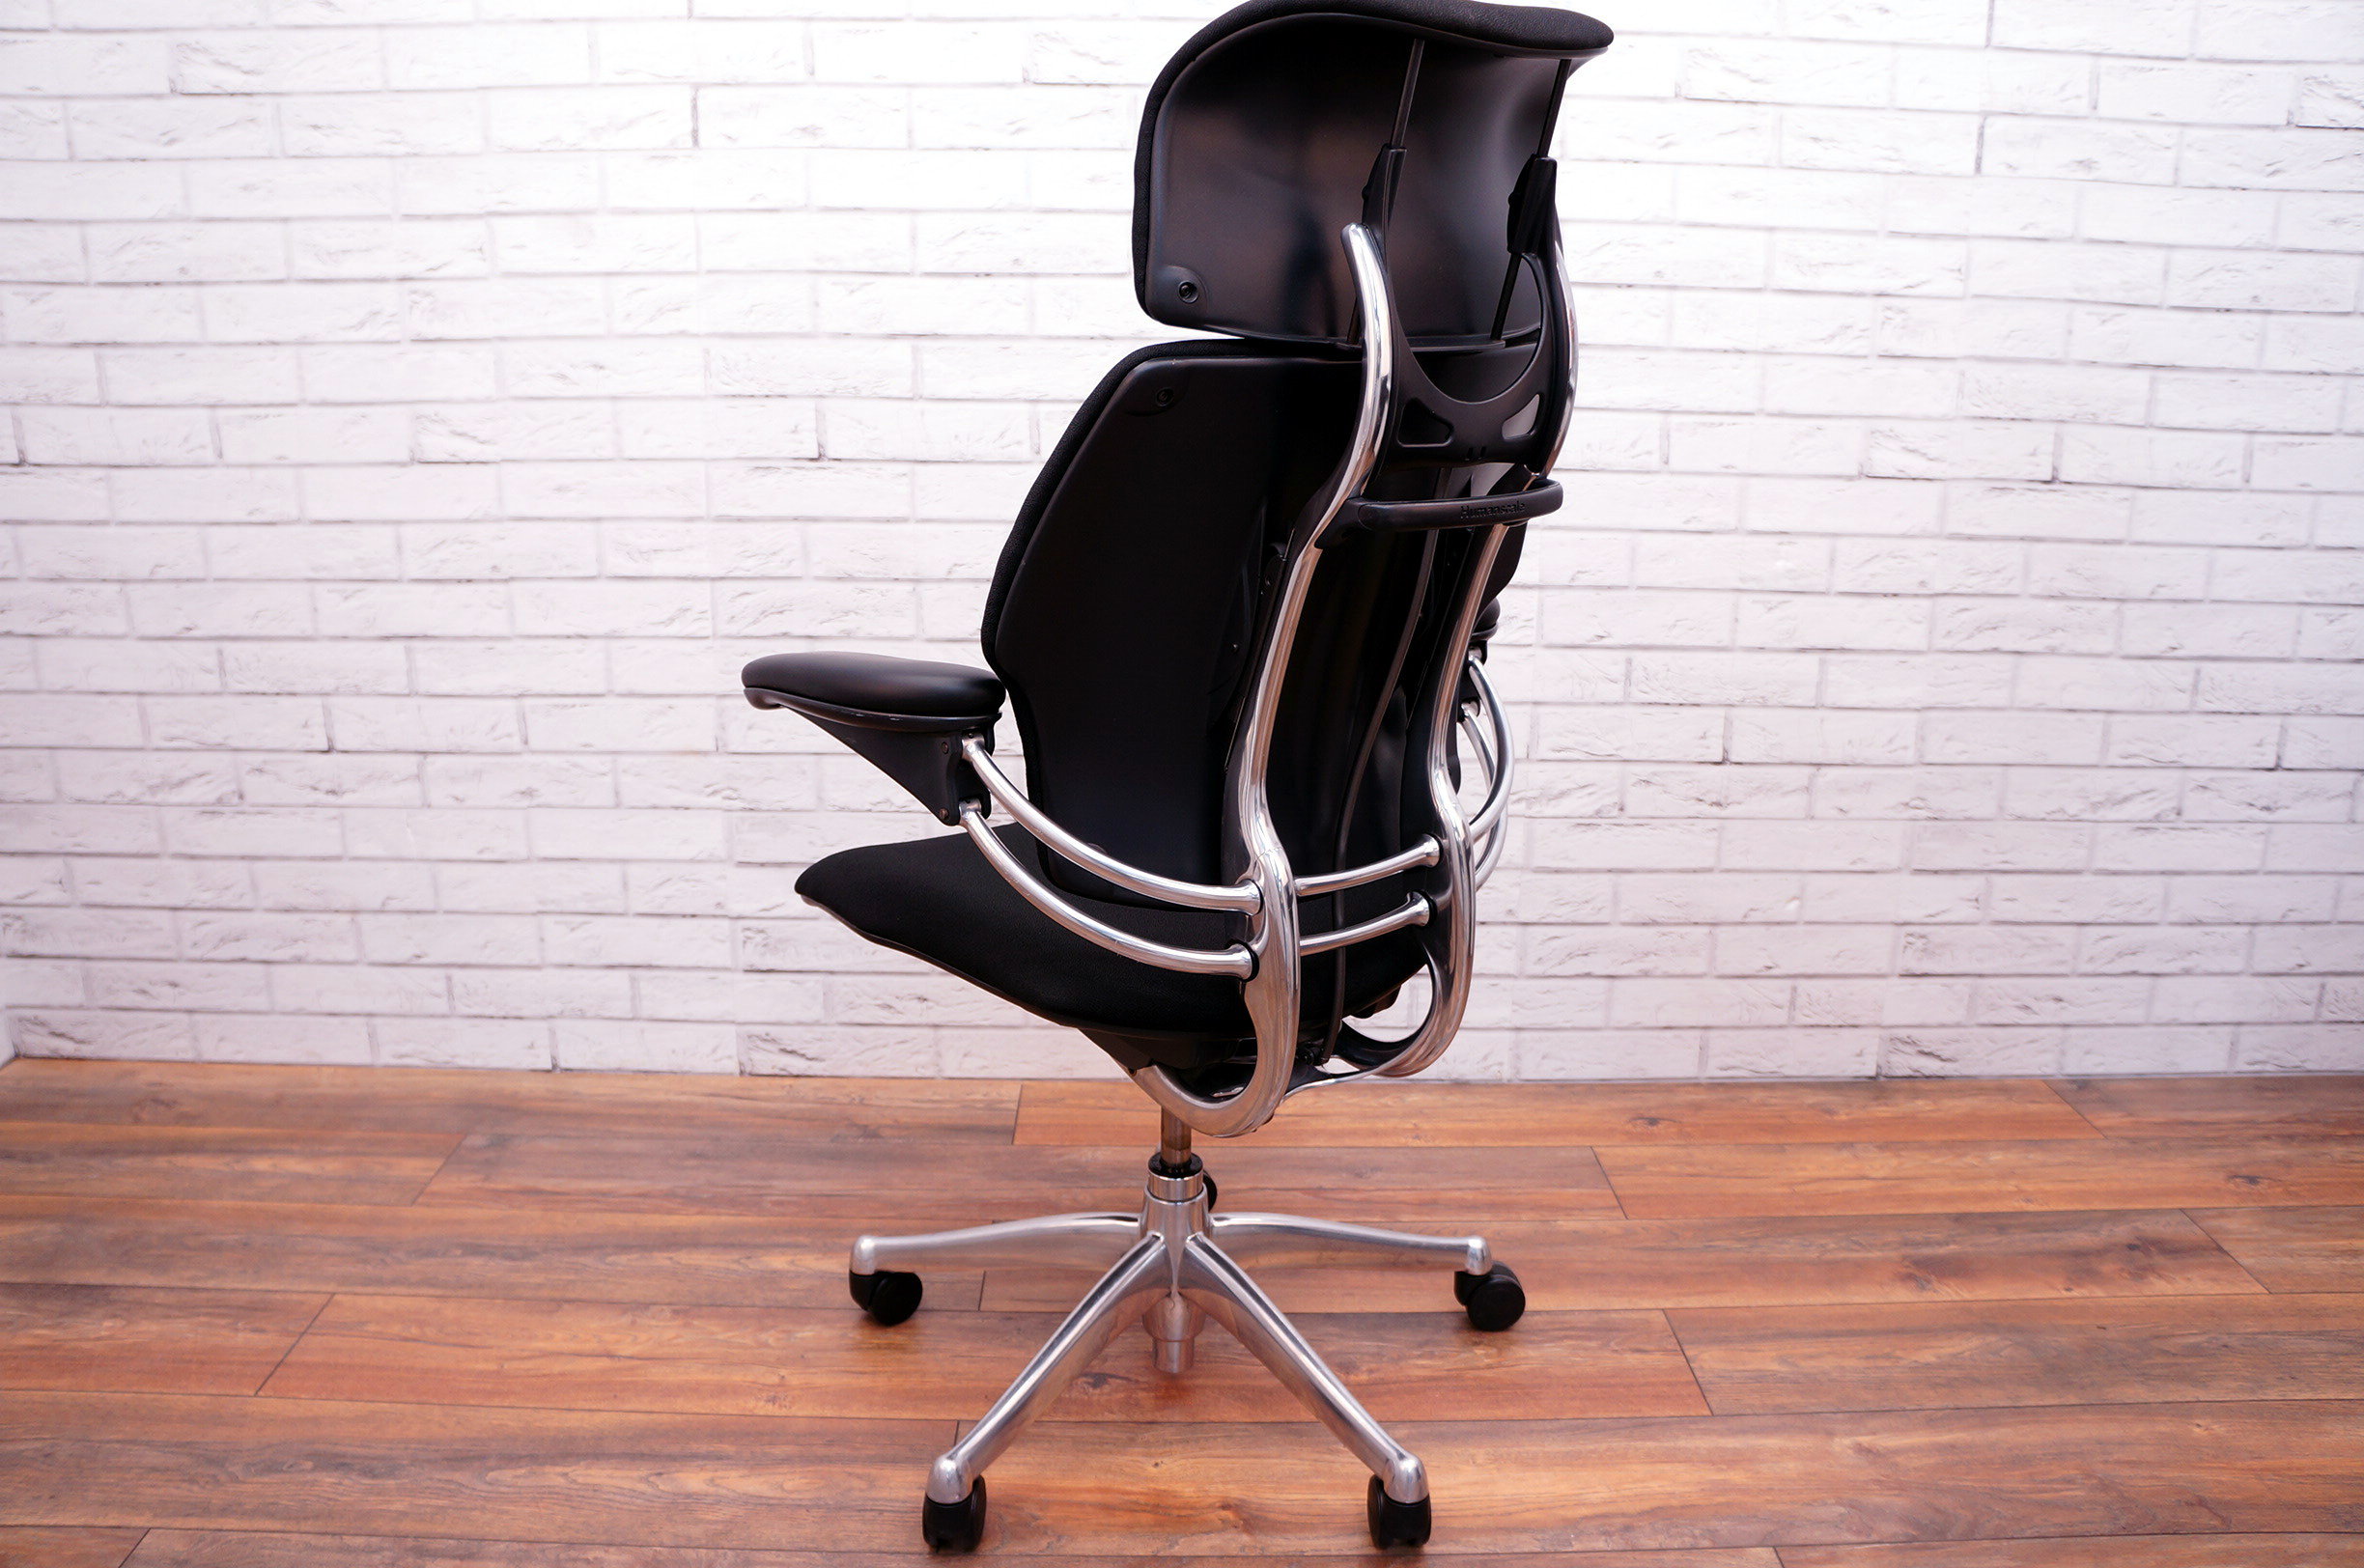 Humanscale freedom task chair chrome frame with headrest in Fabric